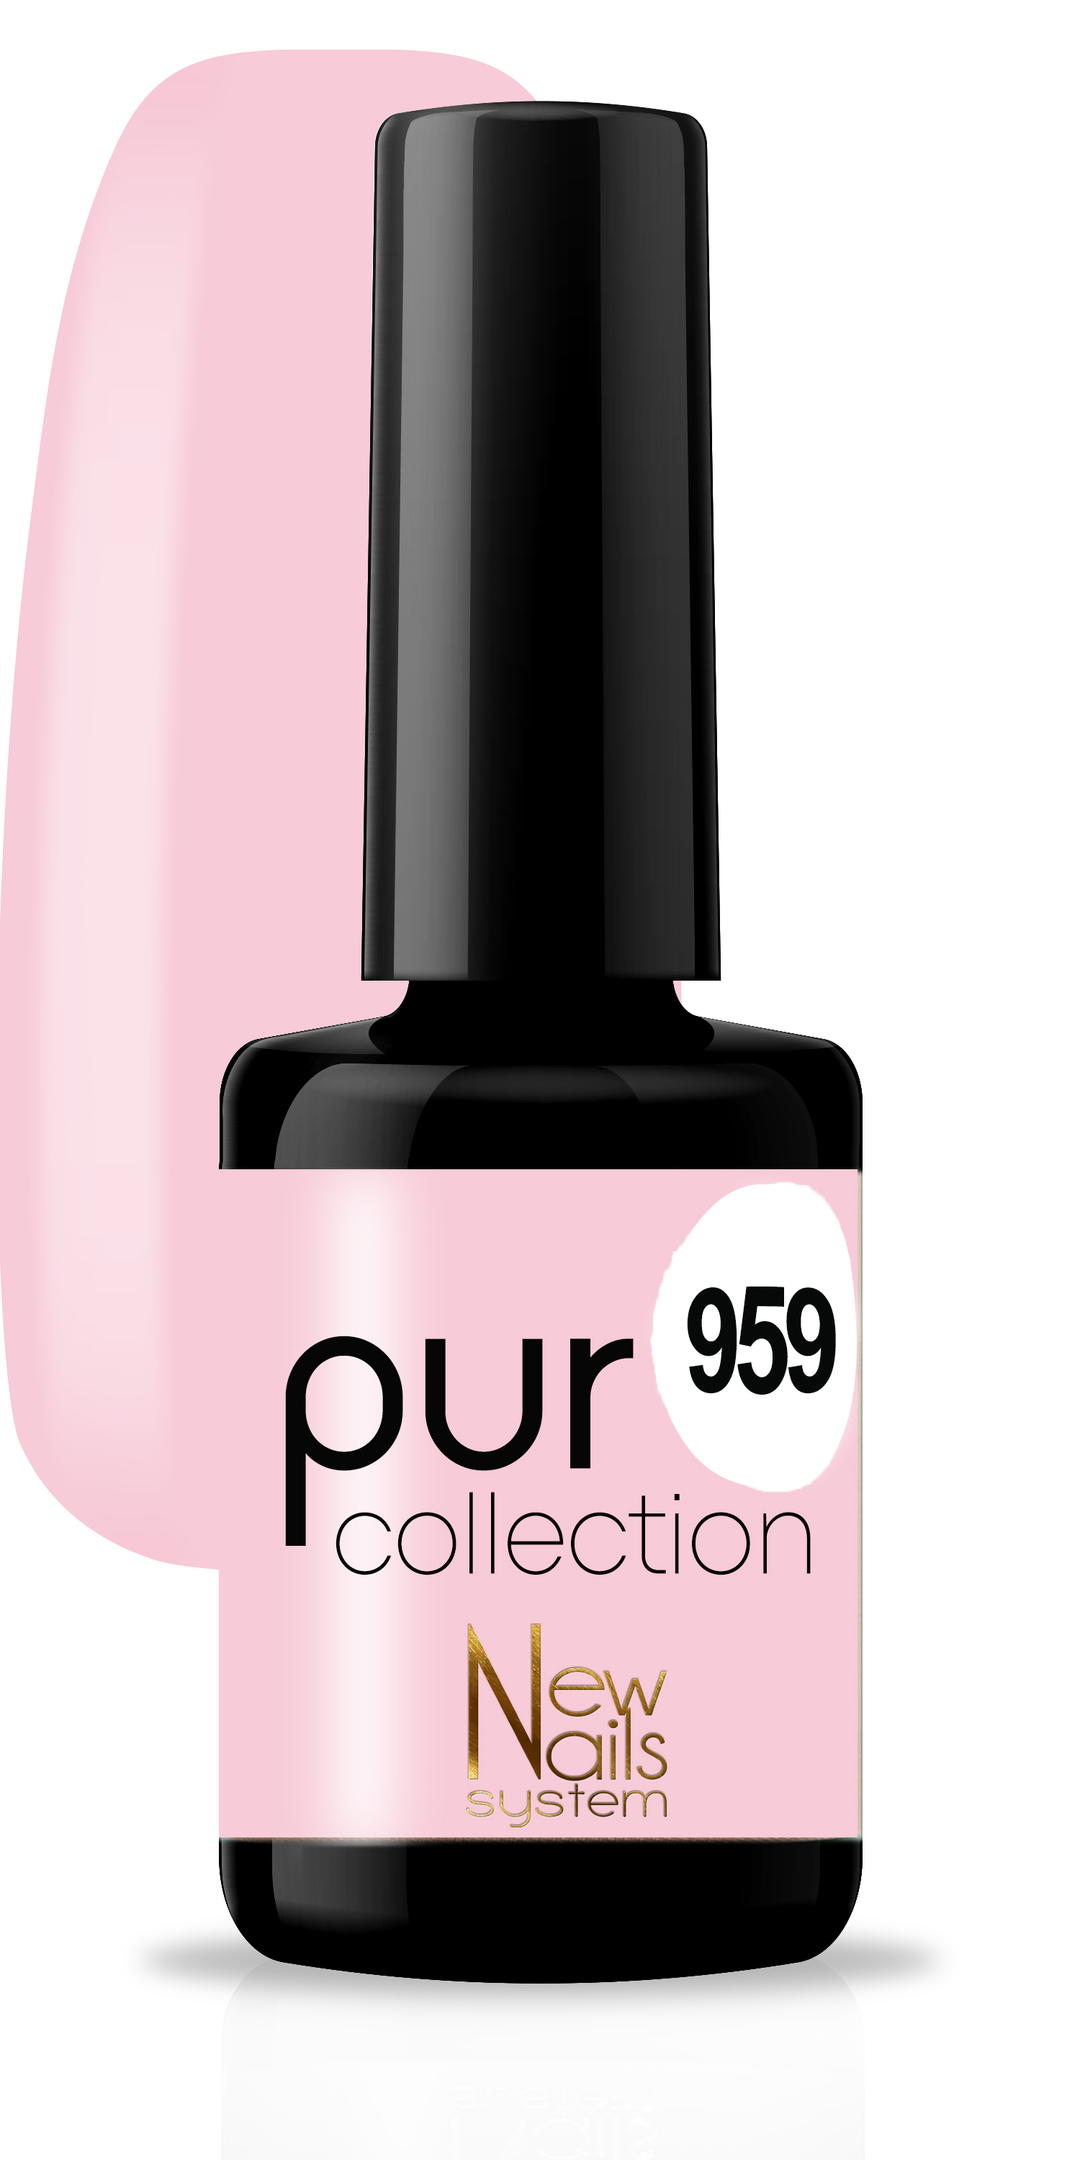 Puro collection 959 color Sweet Pastel semi-permanent 5ml